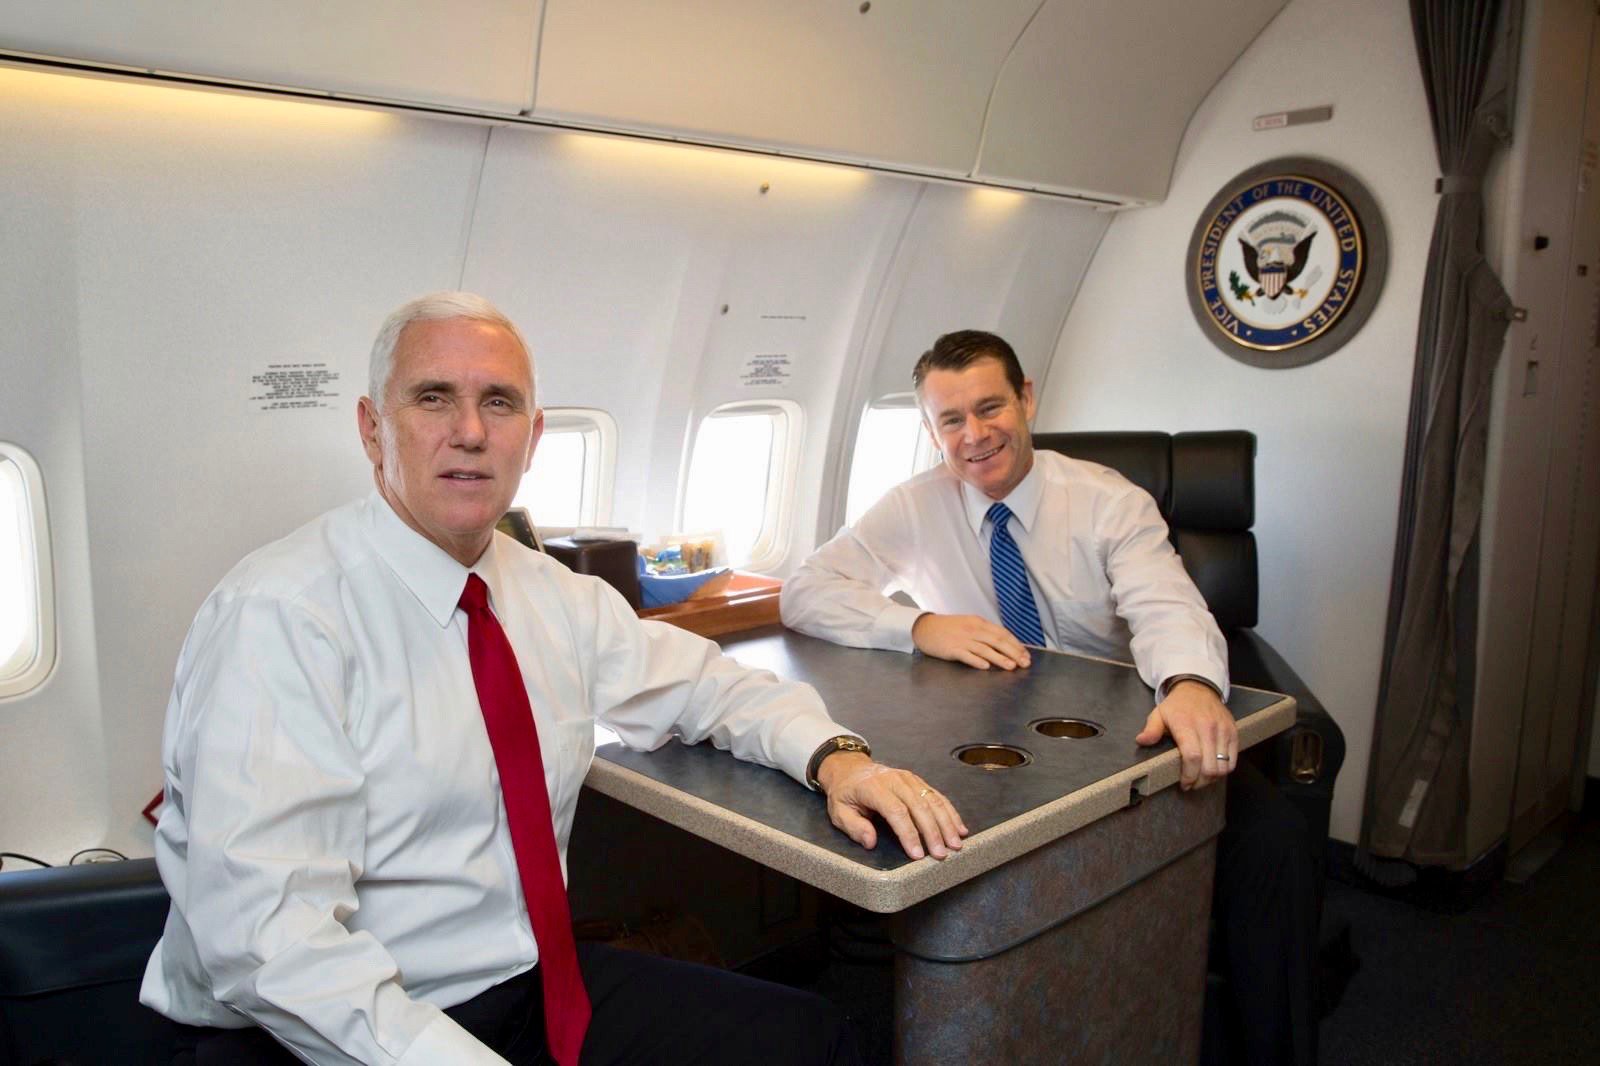 Wishing a happy birthday to a fellow Hoosier and friend Mike Pence! 